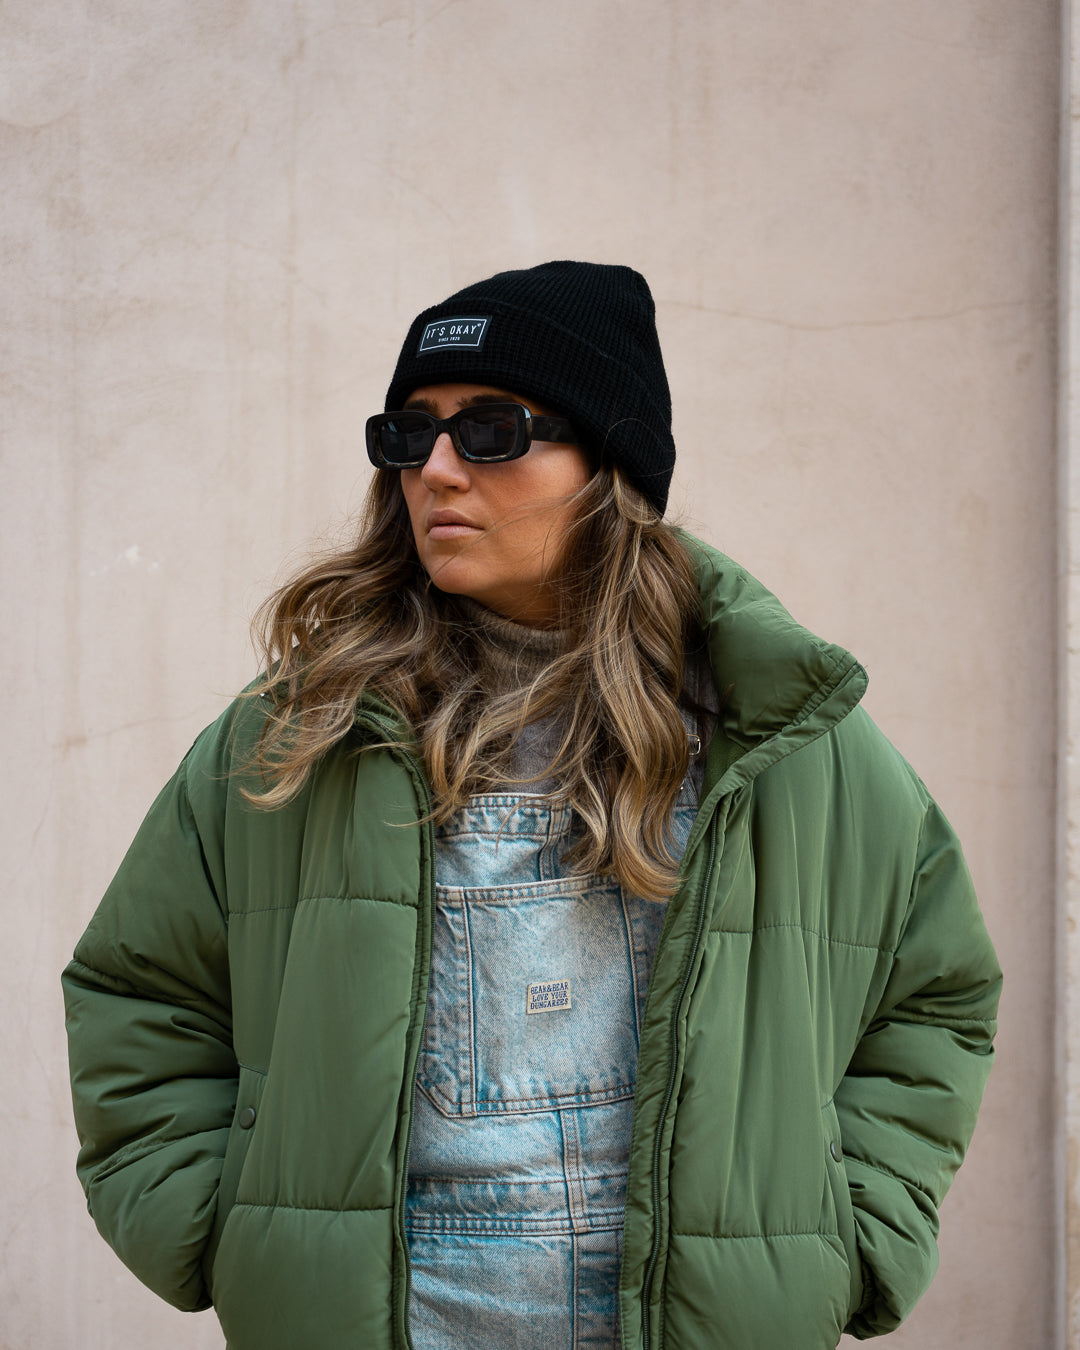 Black Beanie from It's okay | made in Portugal with love | feel cozy and warm with this knitted beanie. Pt gorro de inverno it's okay em preto. Image: woman looking left with sunglasses wearing black waffle beanie